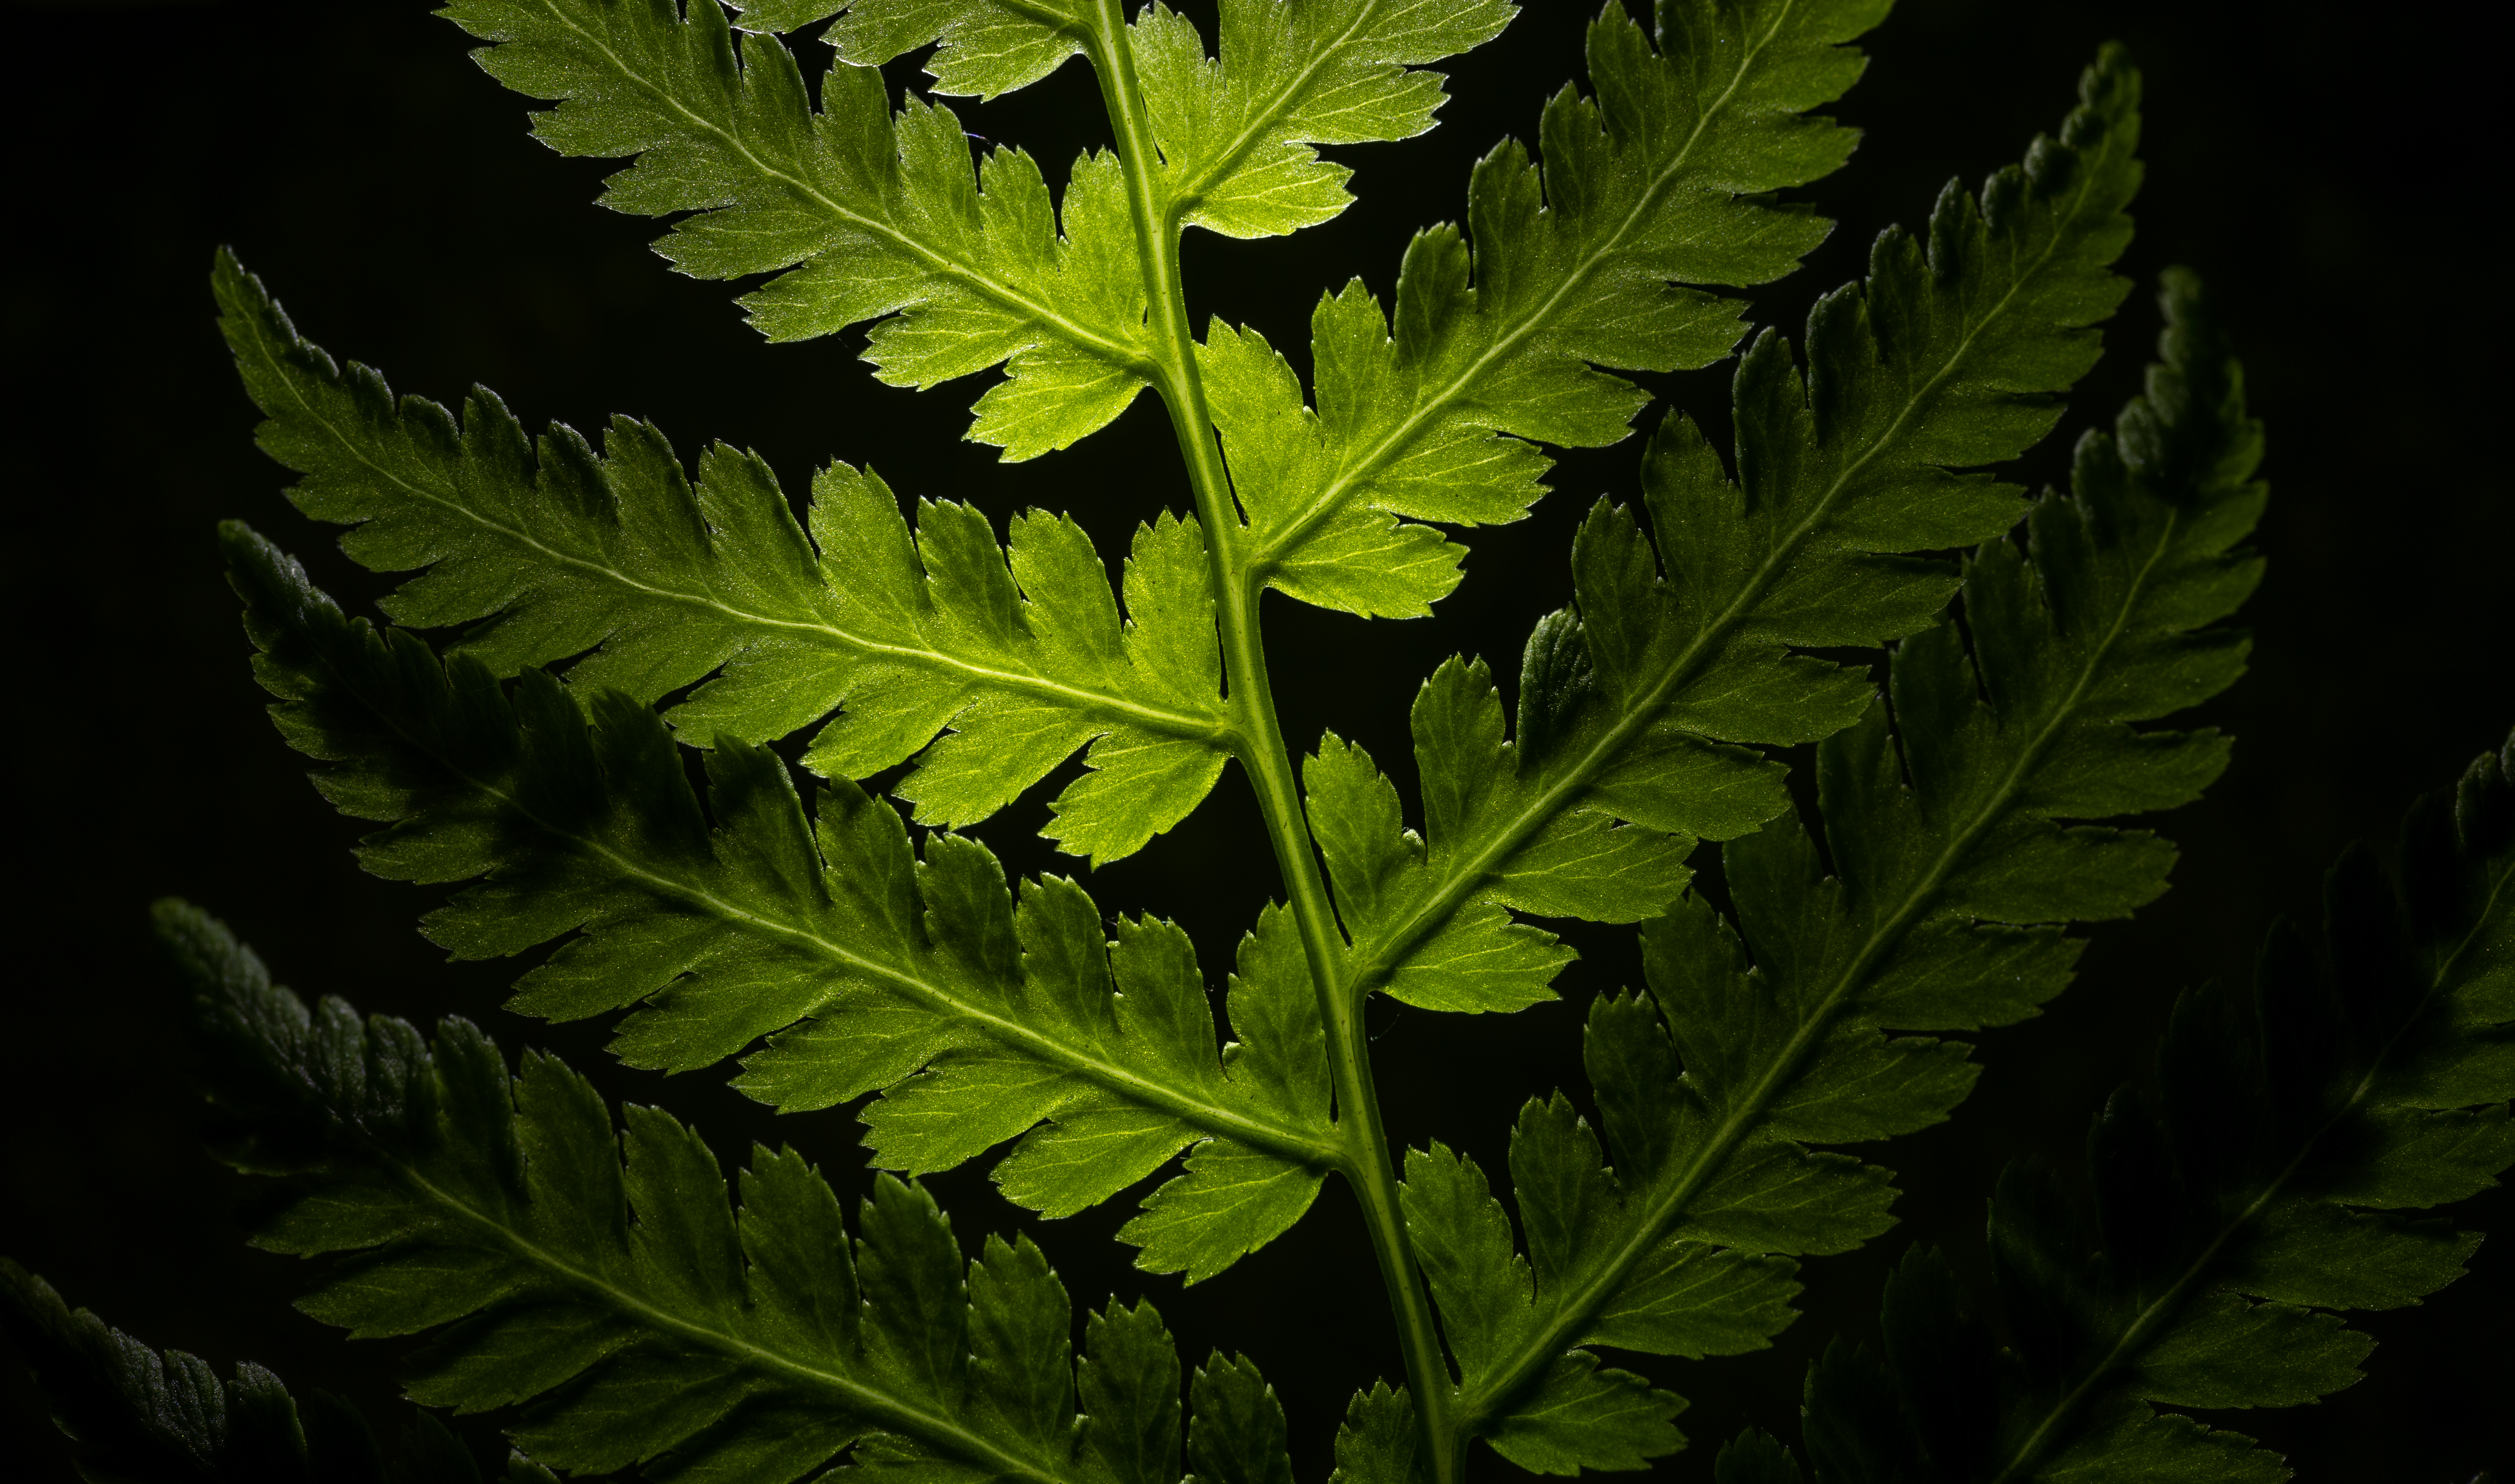 Leaves of a fern on a black background